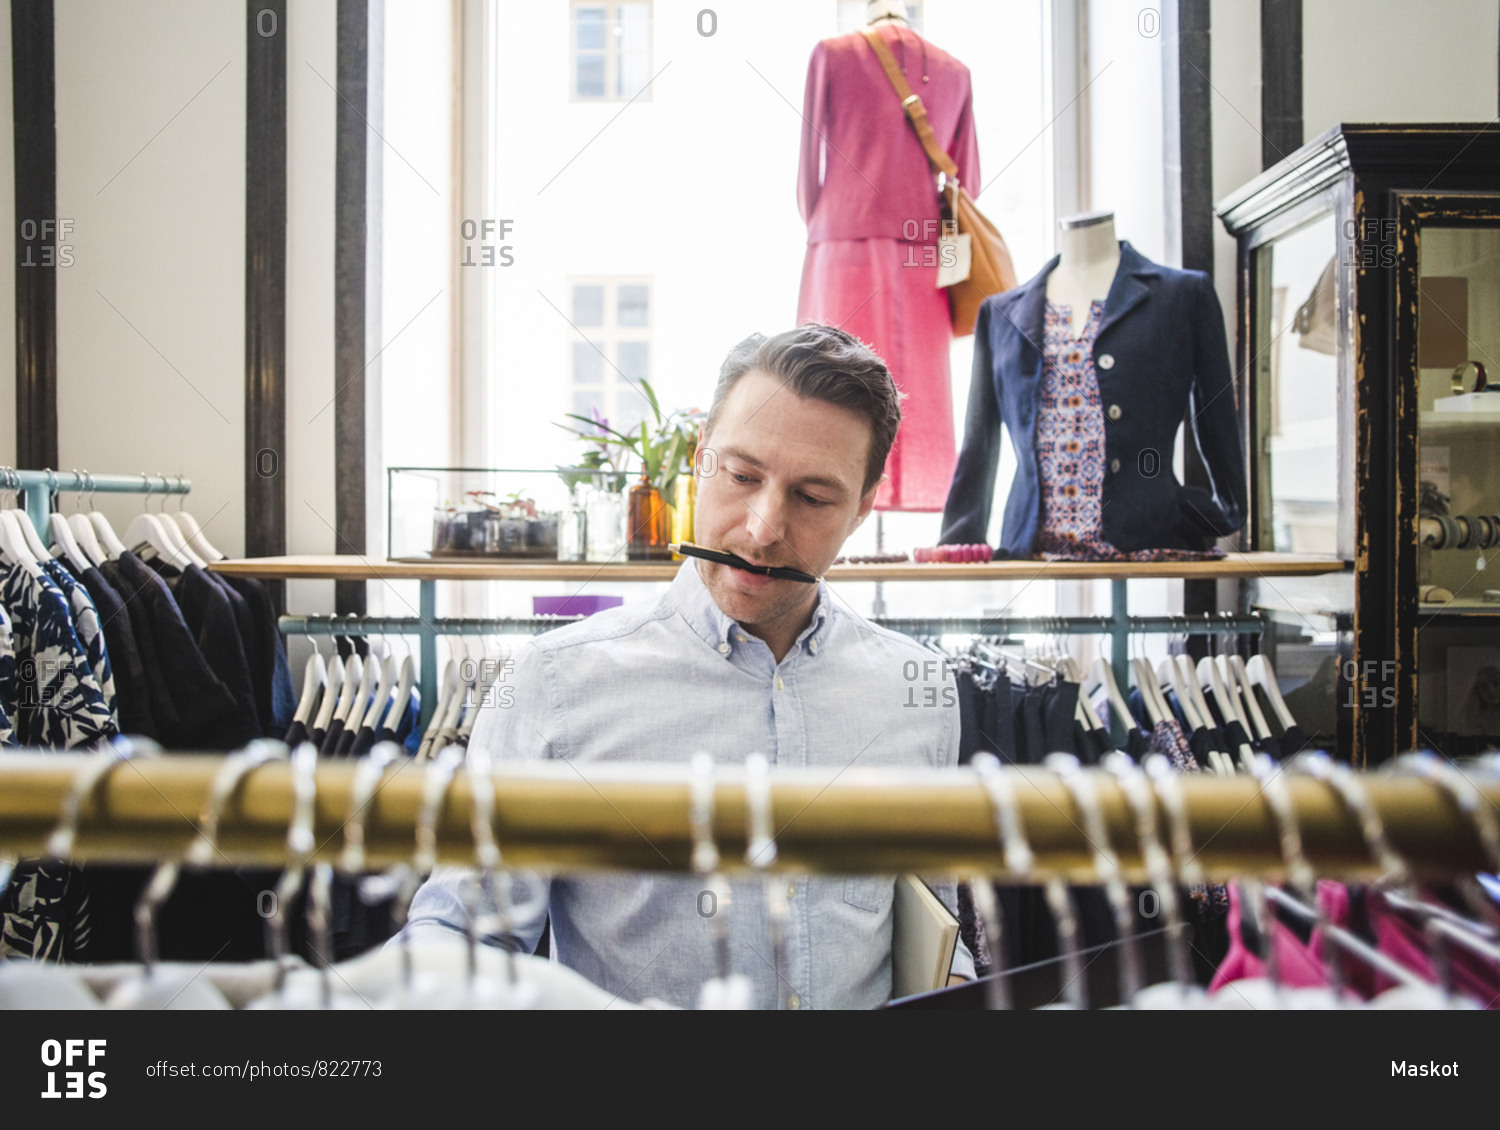 Salesman carrying pen in mouth while looking at clothes rack